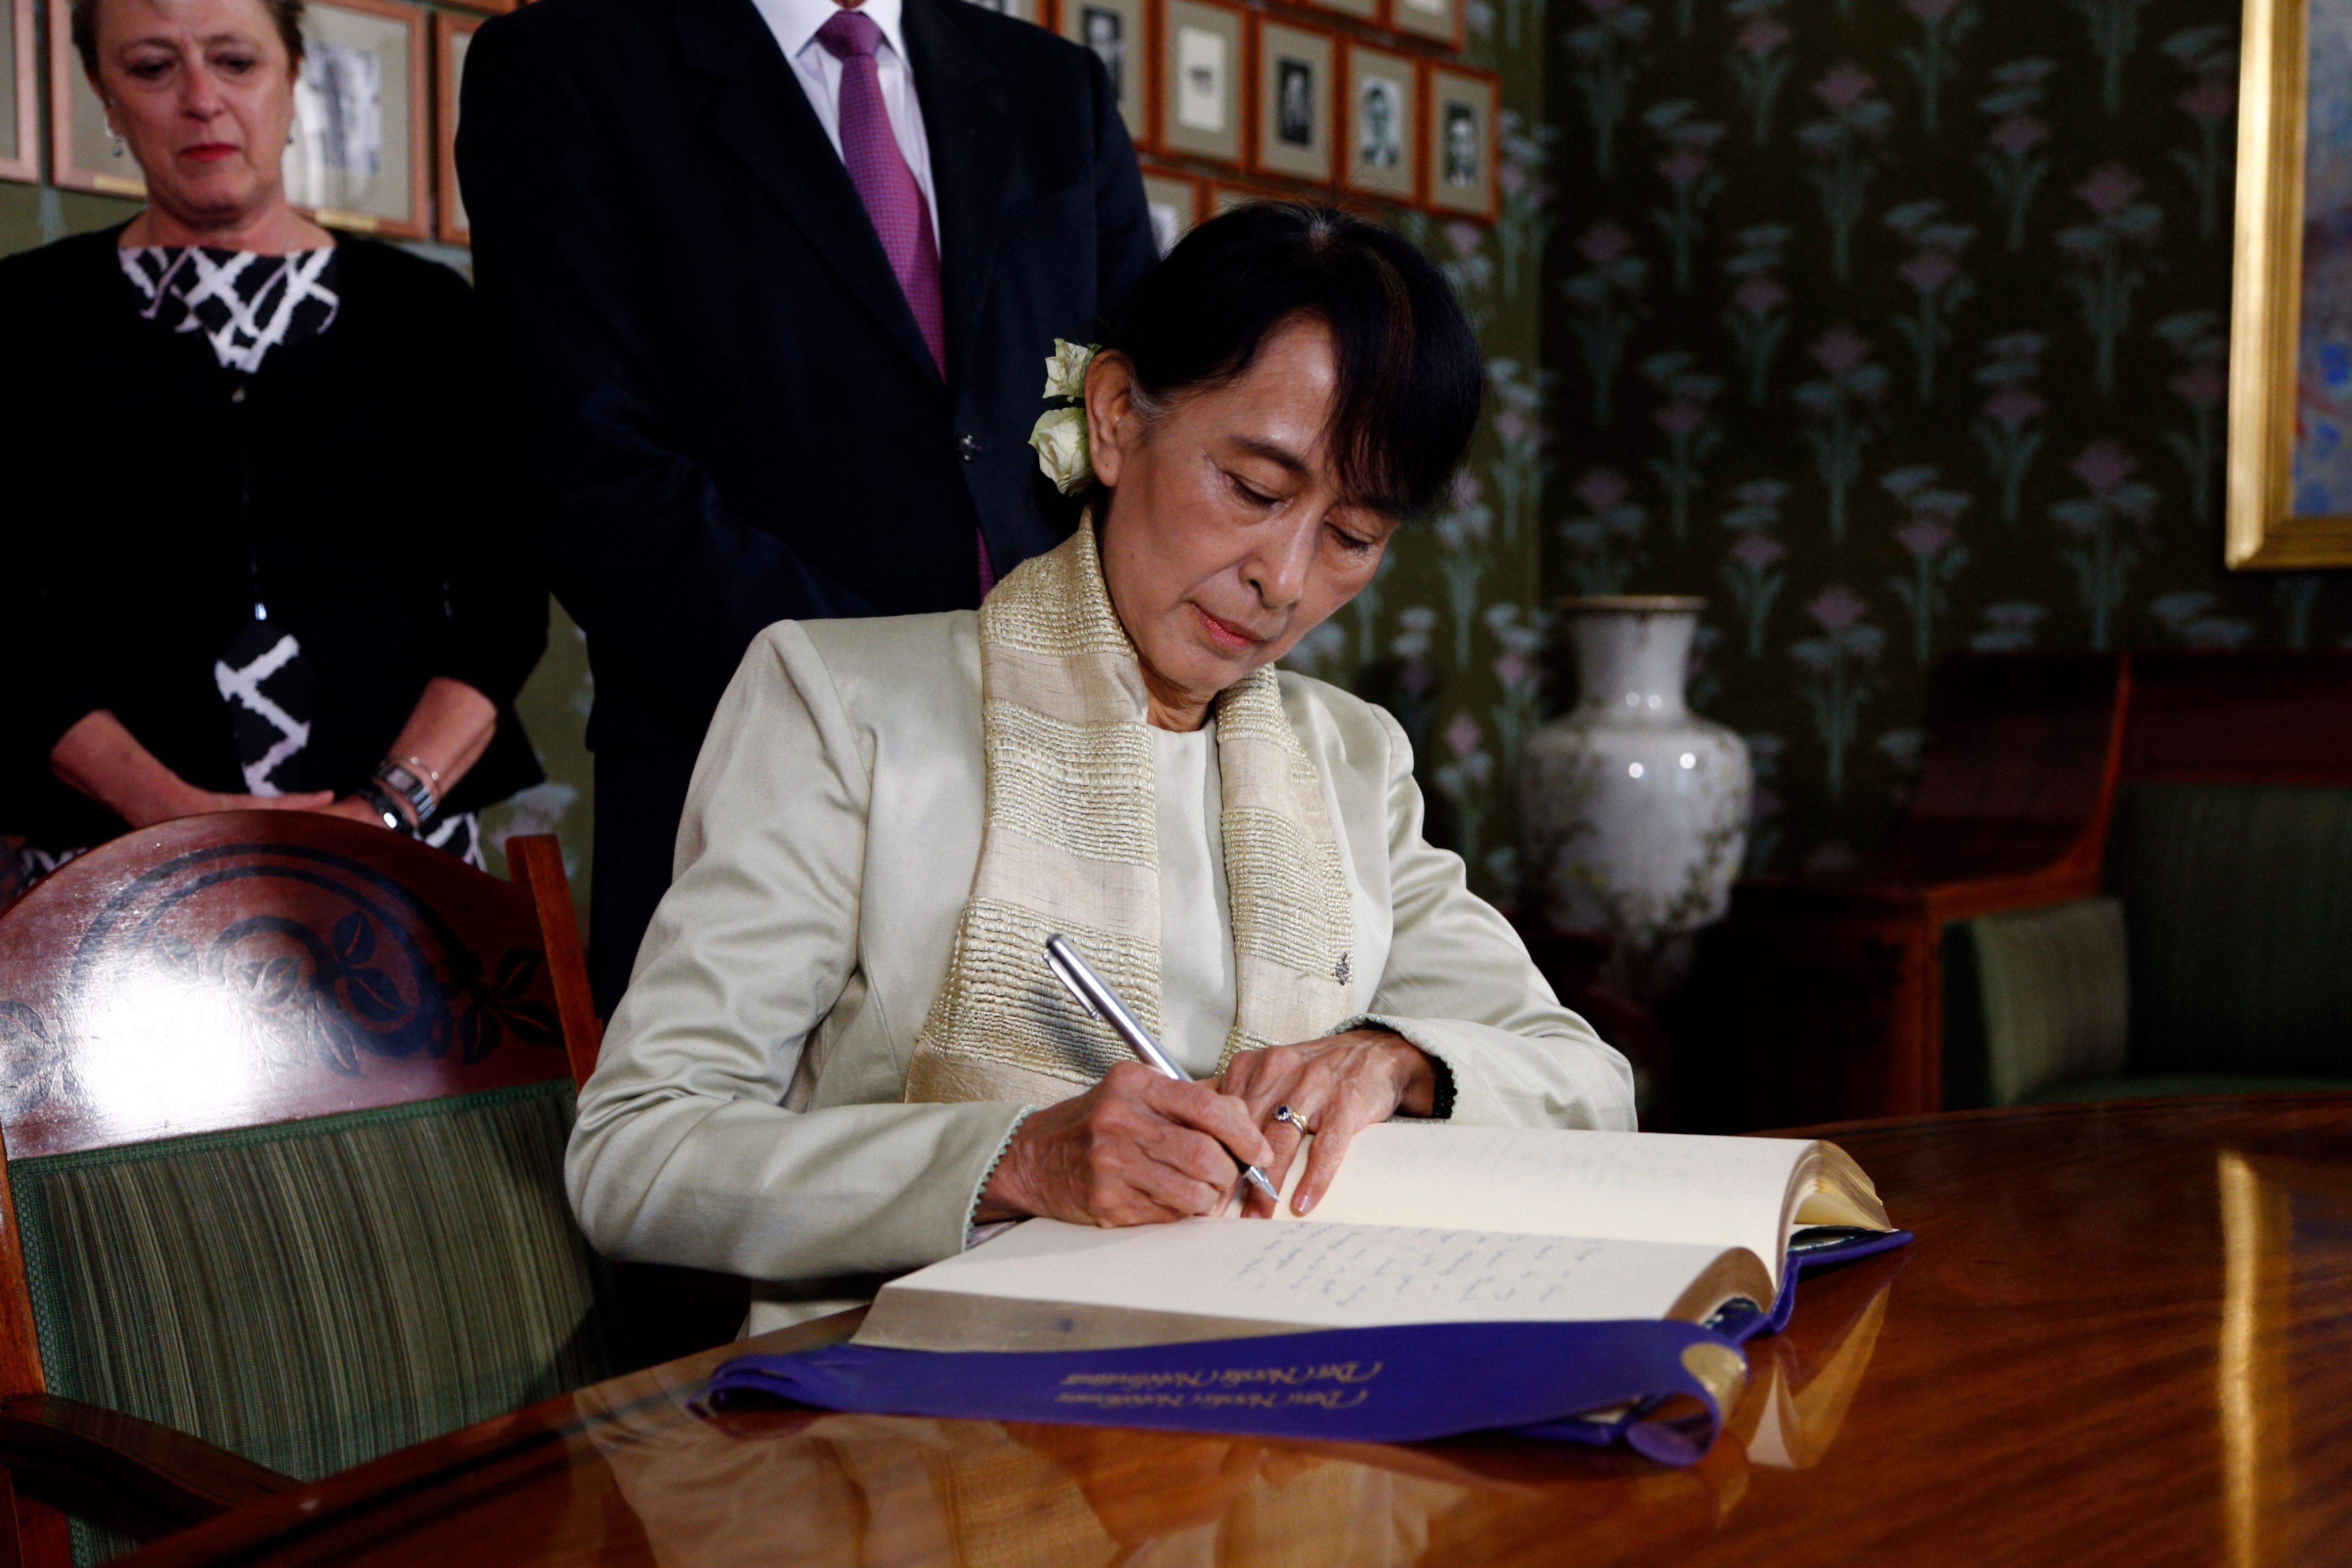 Aung San Suu Kyi was first arrested after spearheading a non-violent movement of opposition to the Burmese military junta